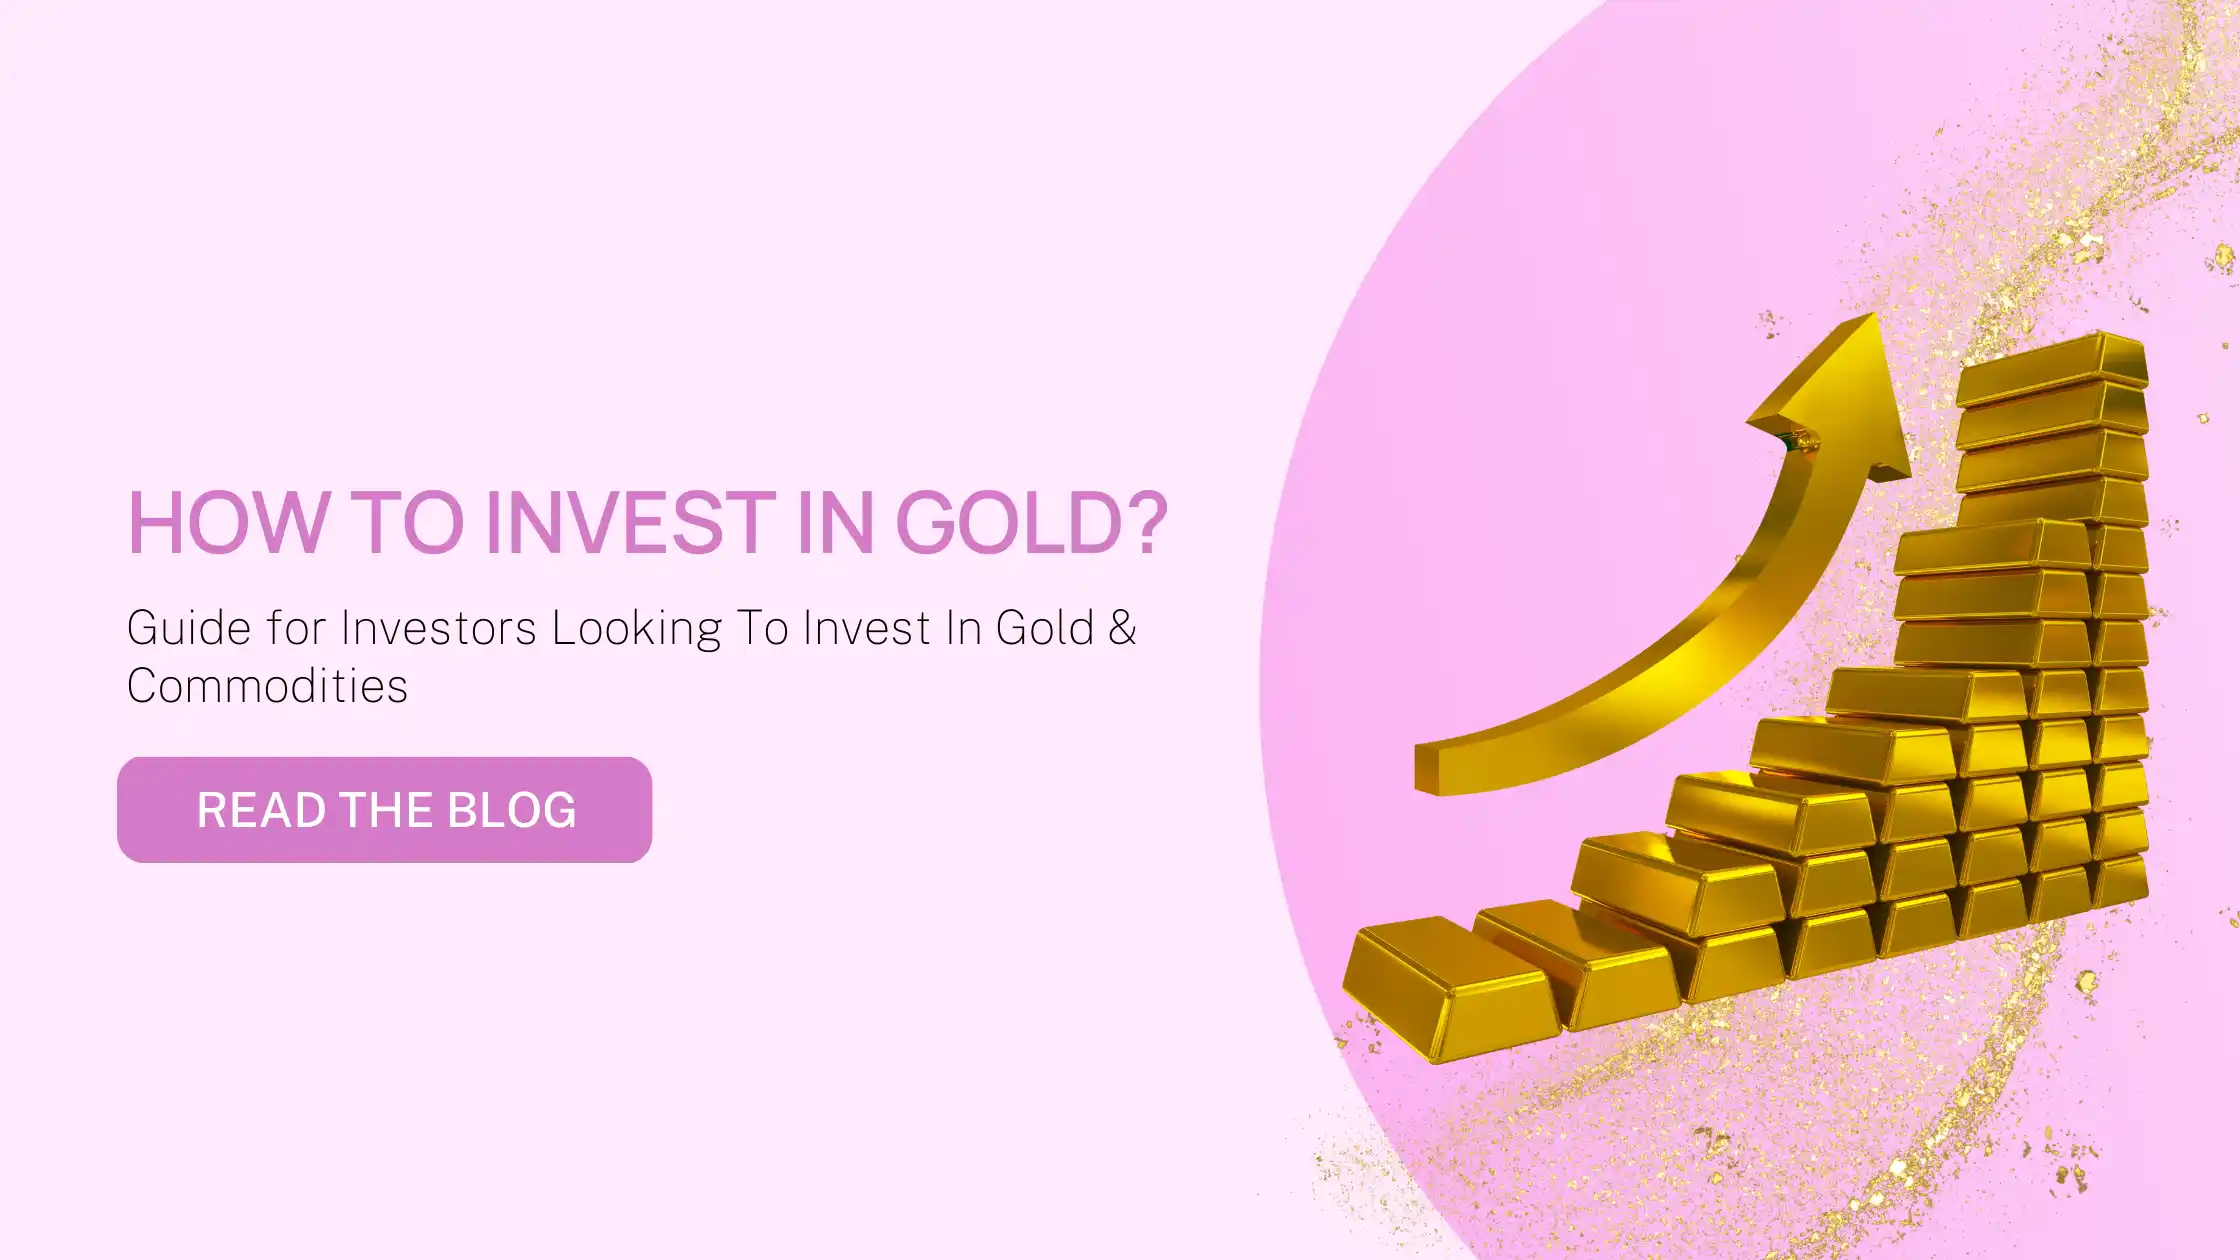 How to Invest in Gold? Guide for Investors